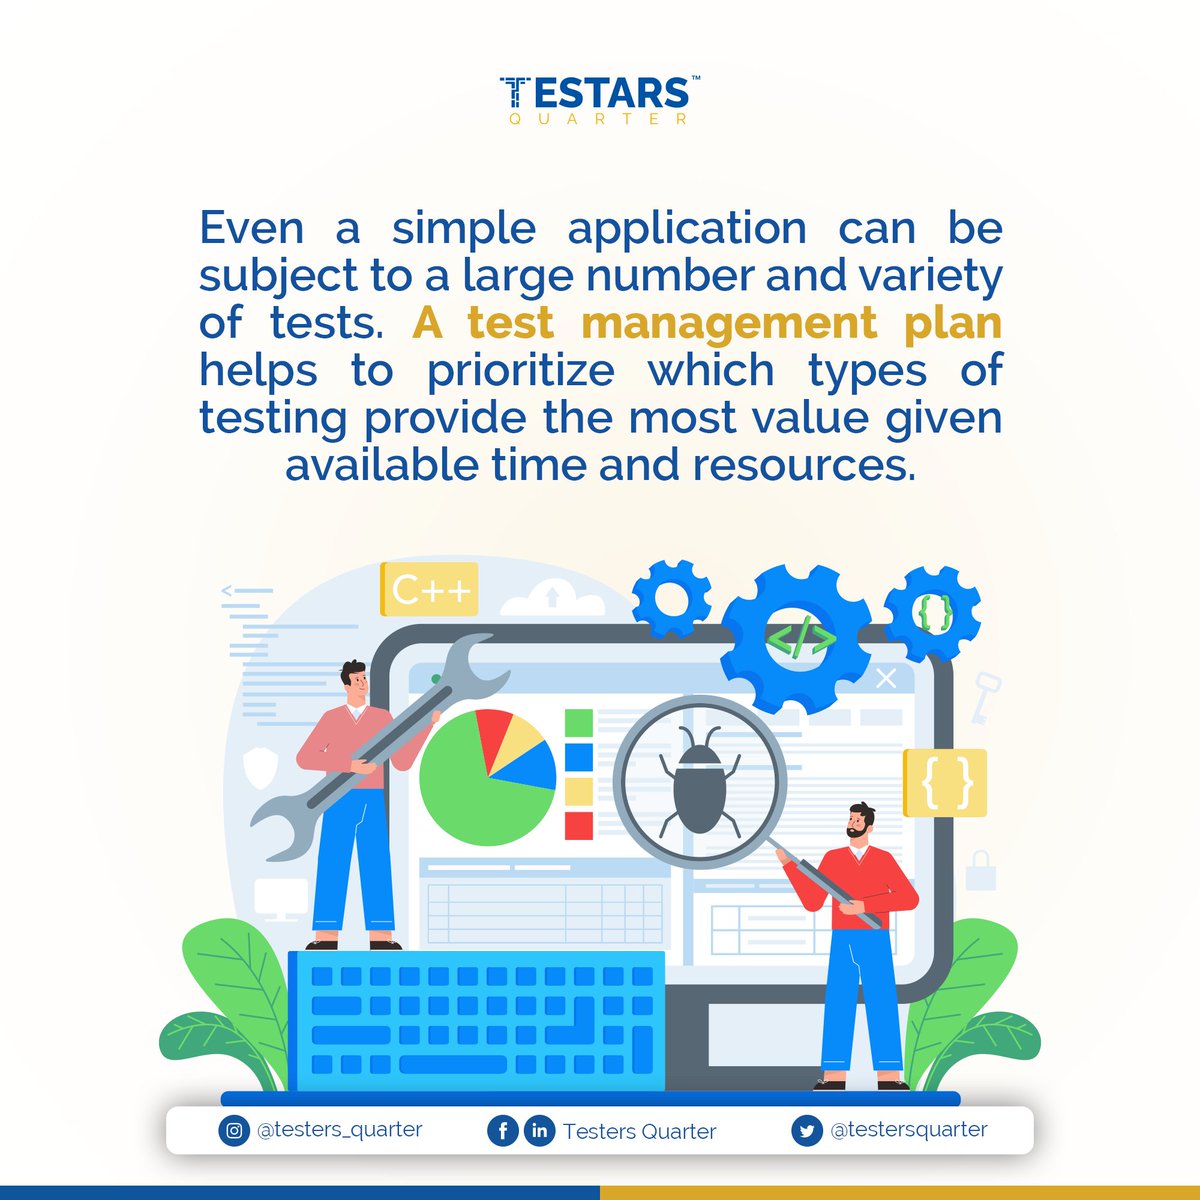 Even a simple application can be subject to a large number and variety of tests.

A test management plan helps to prioritize which types of testing provide the most value given available time and resources.

#softwaretesters #qaengineer #softwaretester #agiletesting